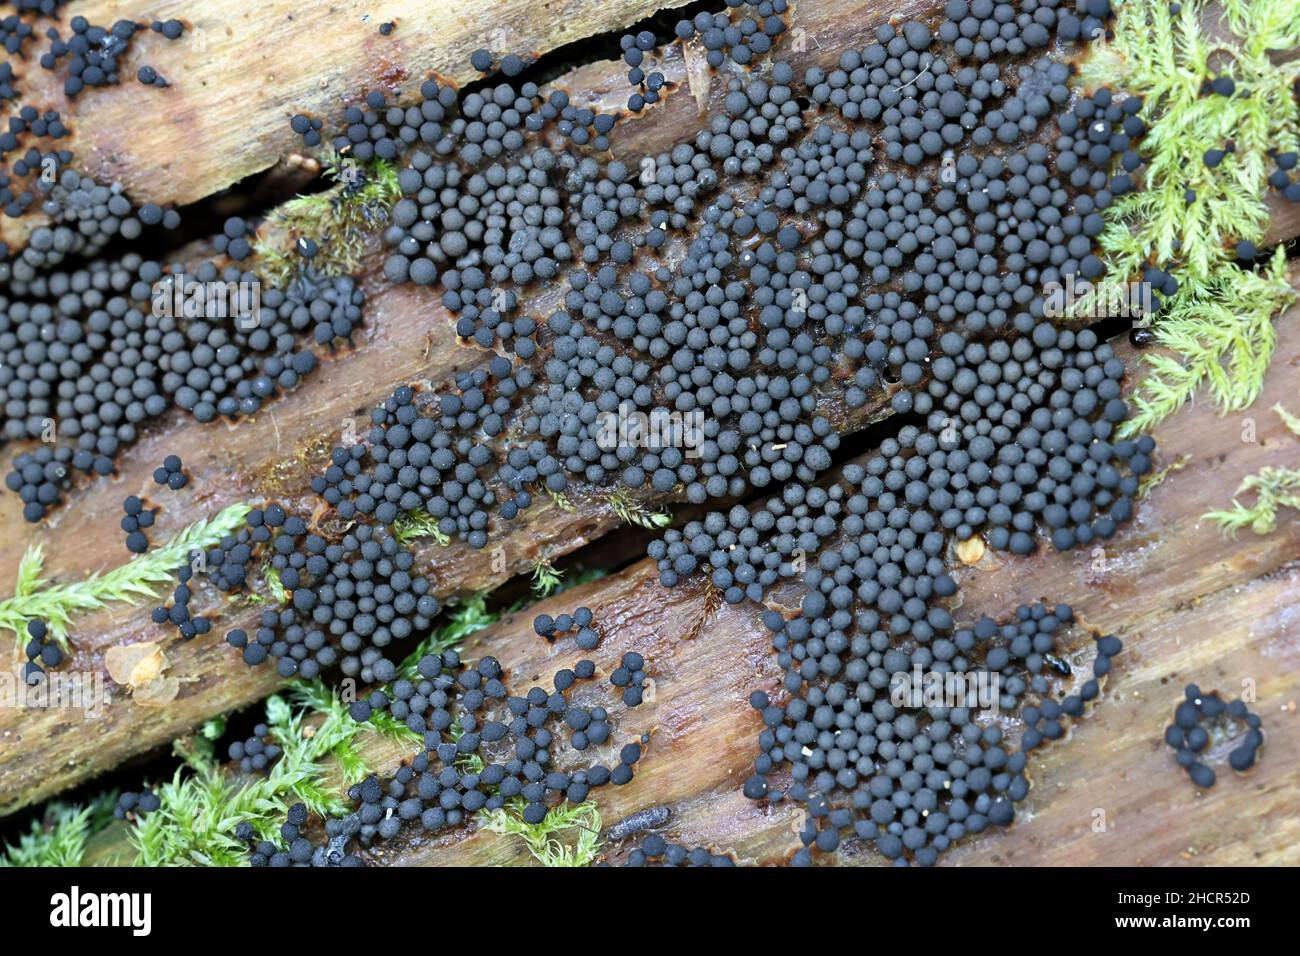 Cribraria argillacea, a slime mold from Finland with no common English name Stock Photo